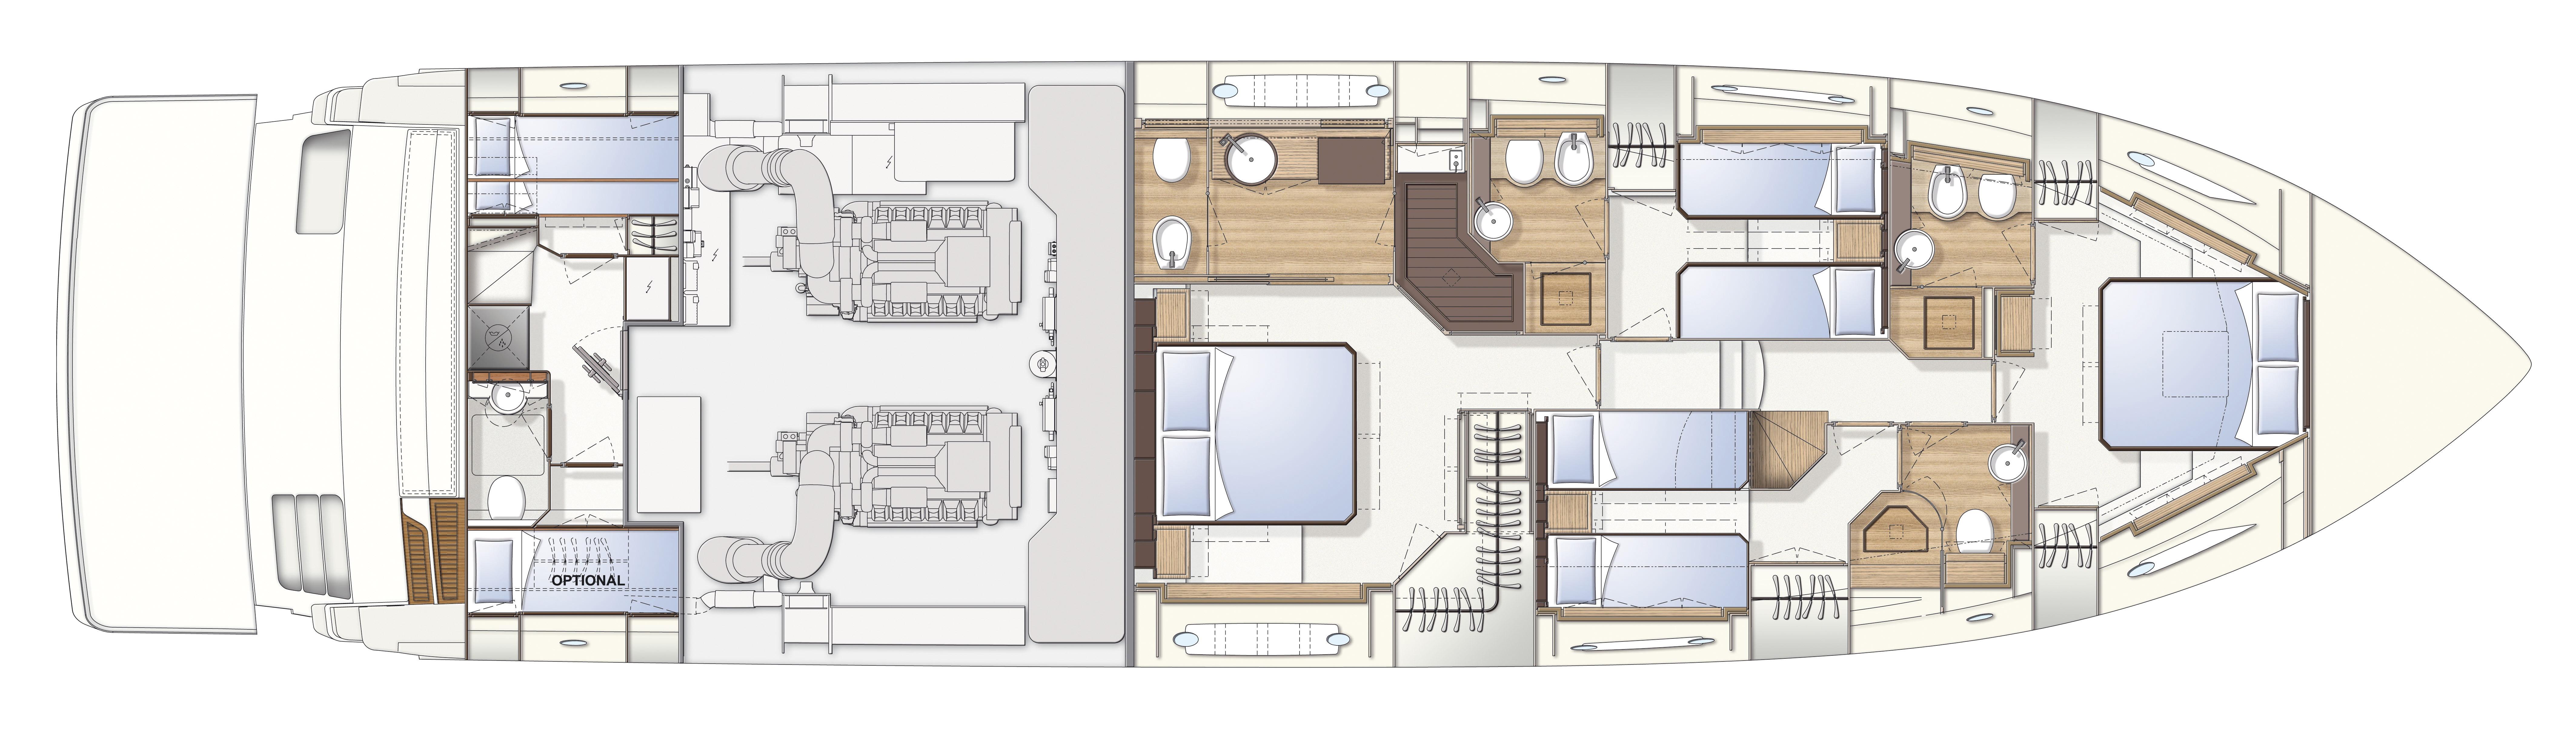 Manufacturer Provided Image: Ferretti 750 Lower Deck Layout Plan